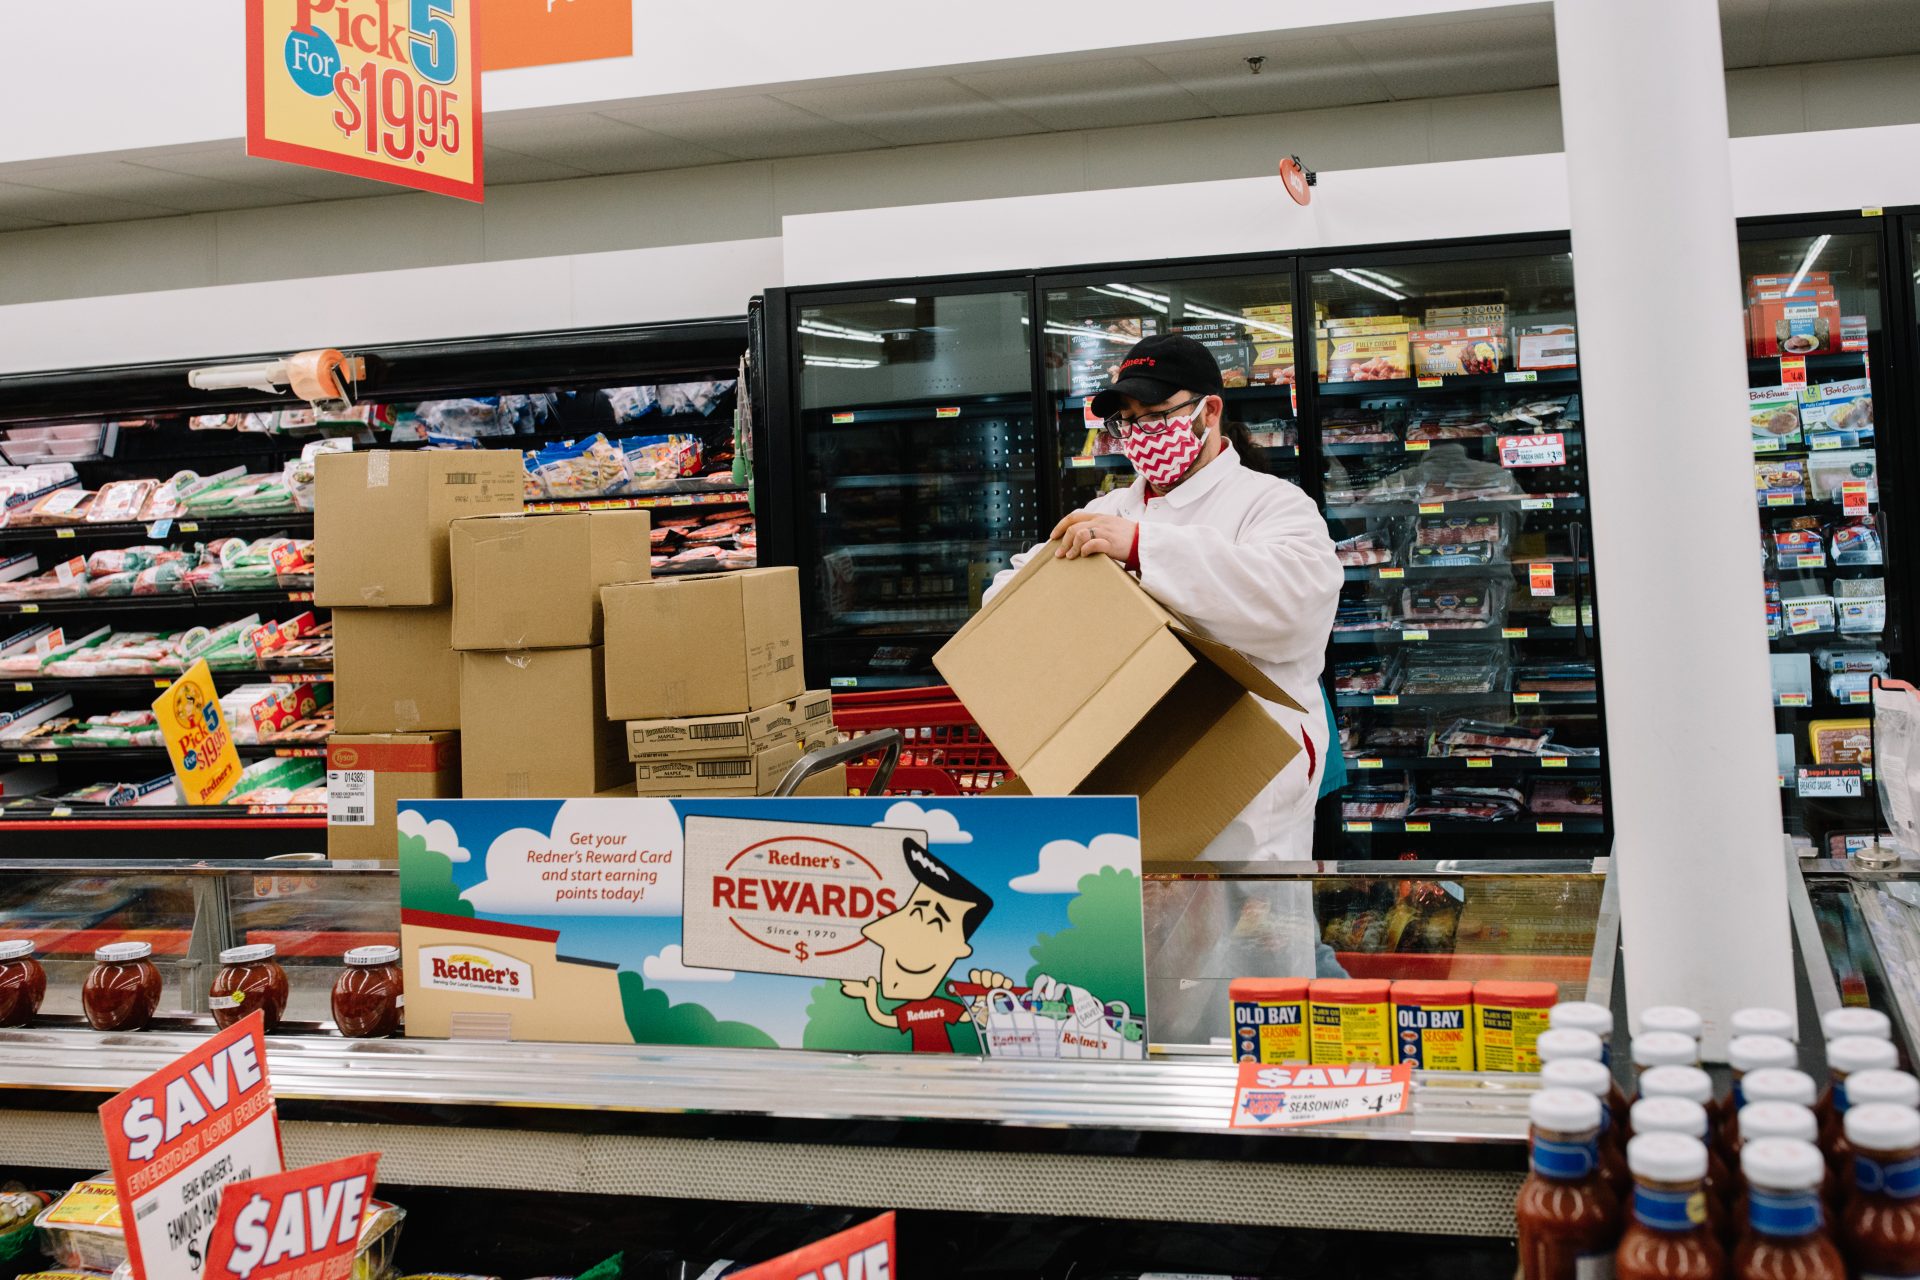 An employee wearing a mask breaks down boxes at a Redner's Warehouse Market on April 10, 2020.